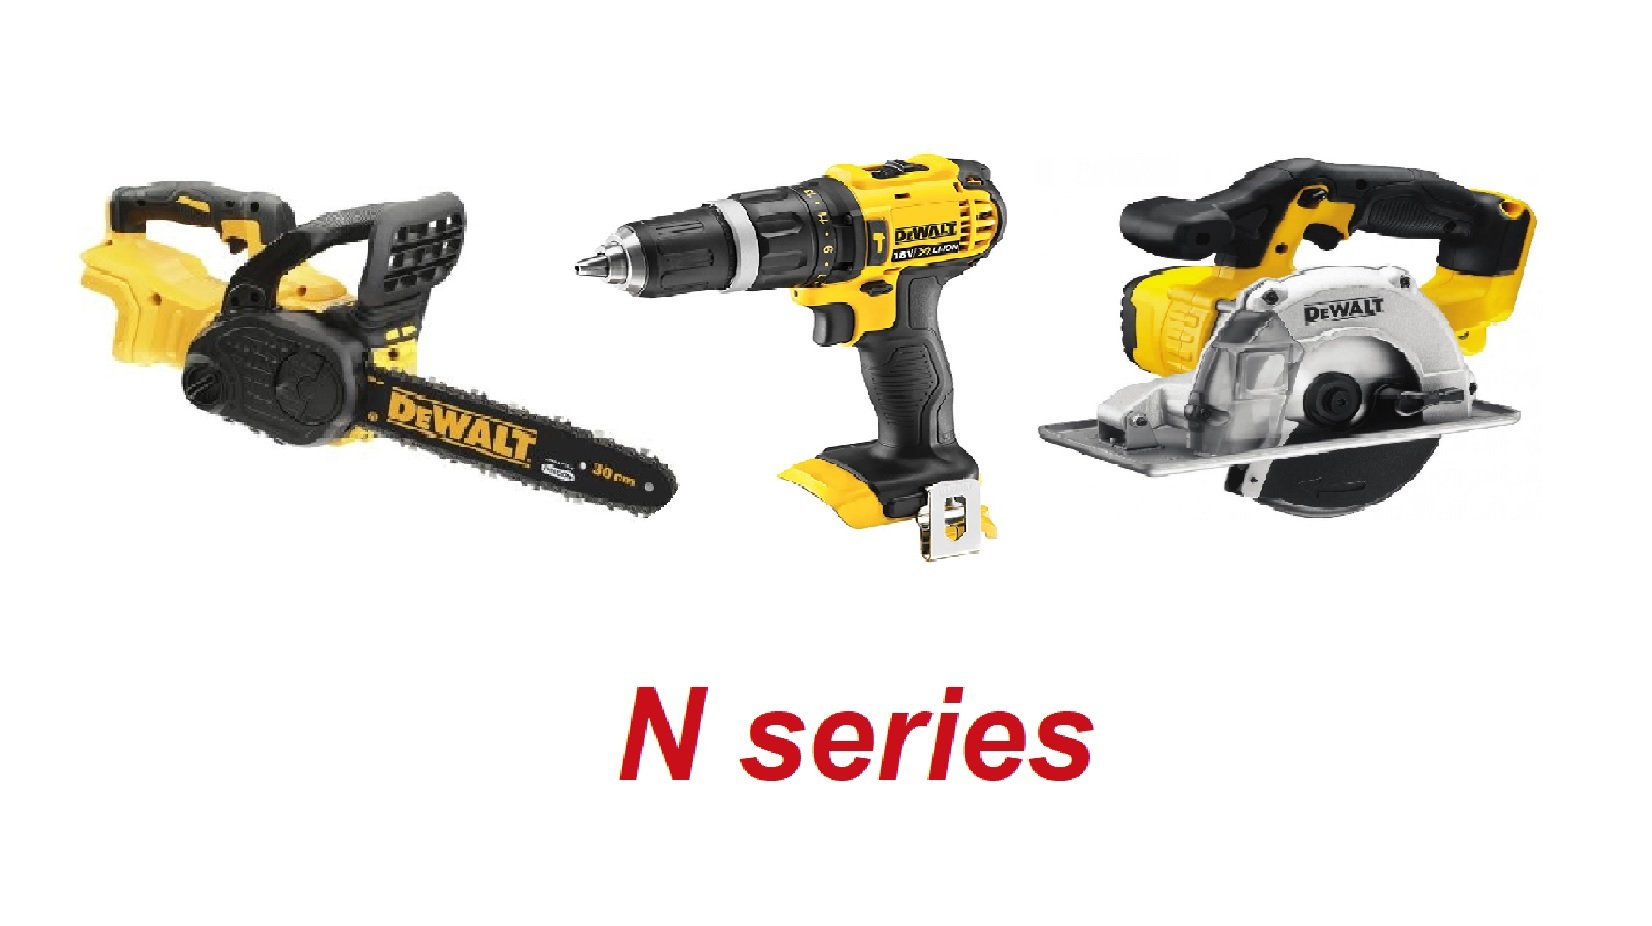 Cordless tools without batteries